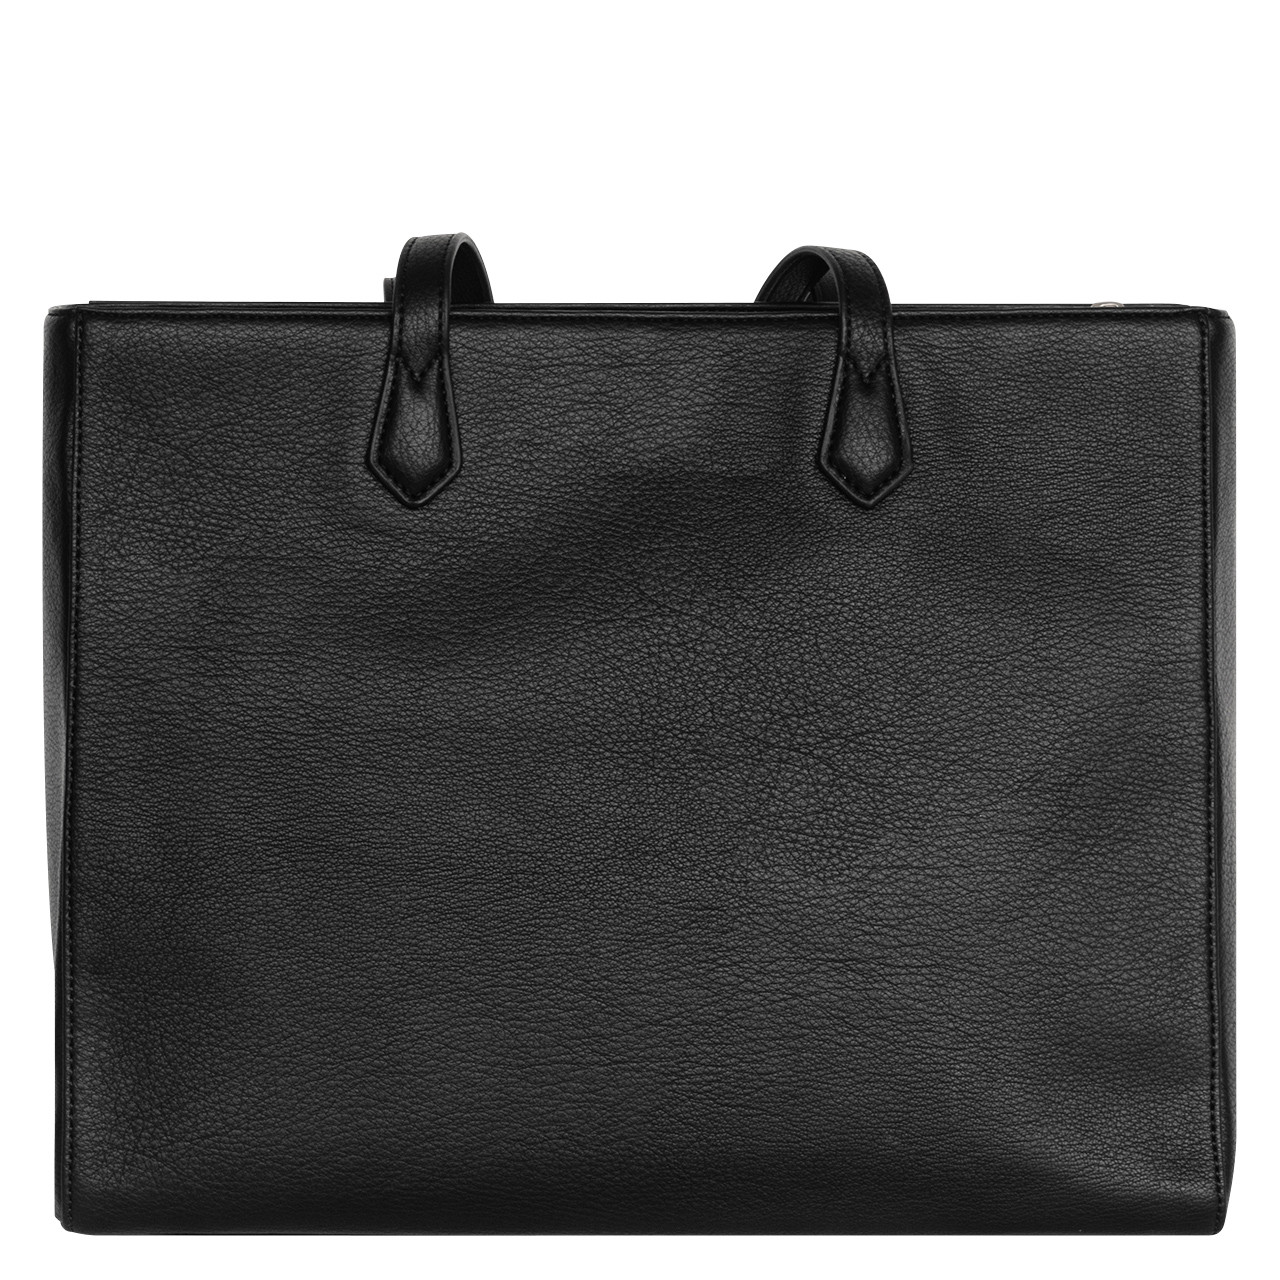 Katherine Simulated Leather Tote - Franklin Planner